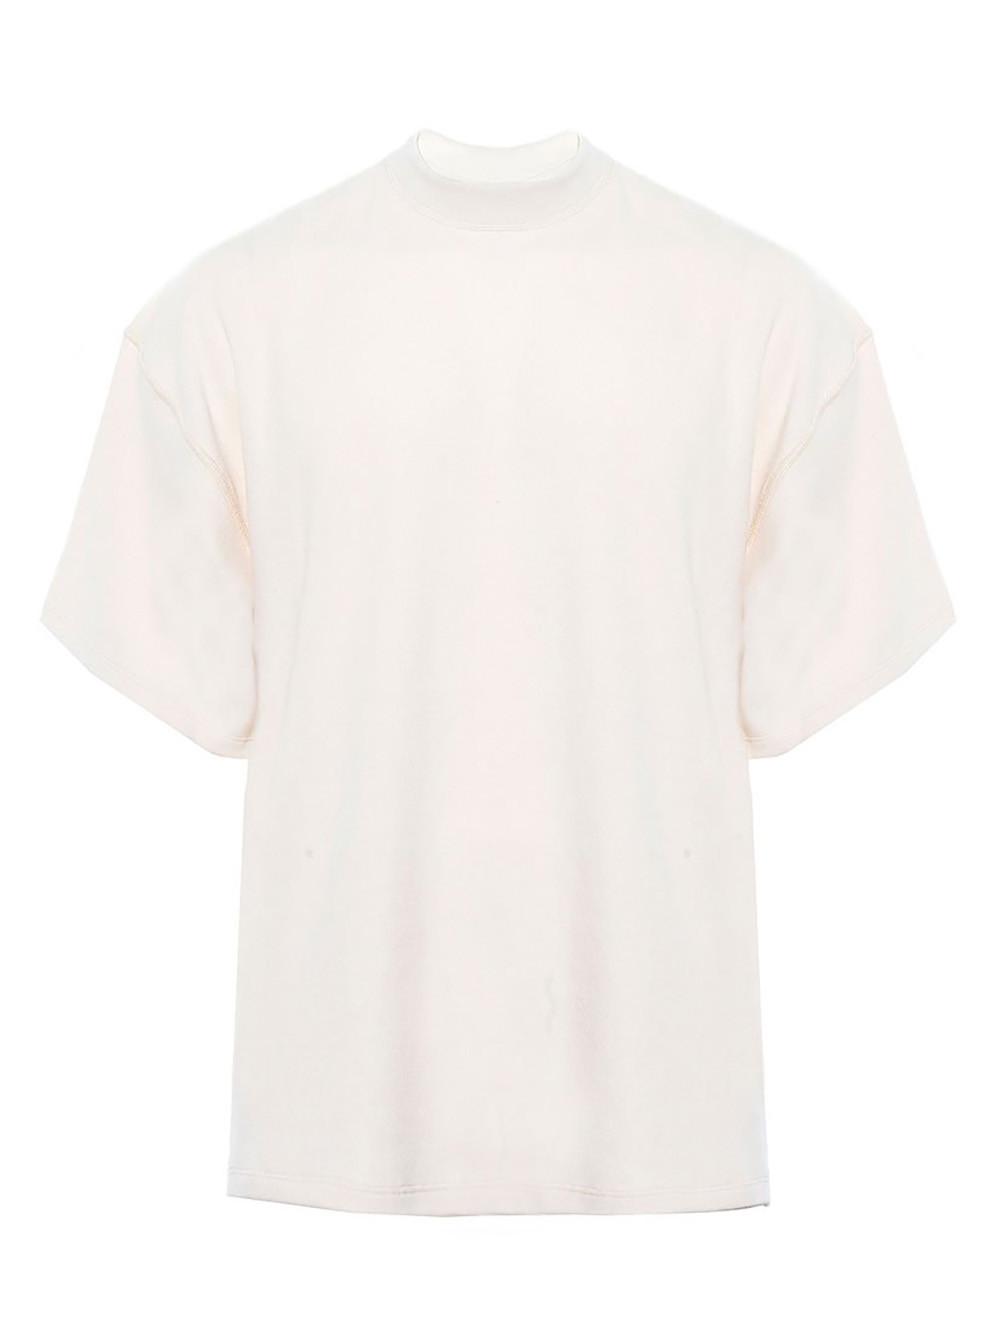 Fear Of God Cotton Inside Out Tee Shirt In Cream Natural For Men